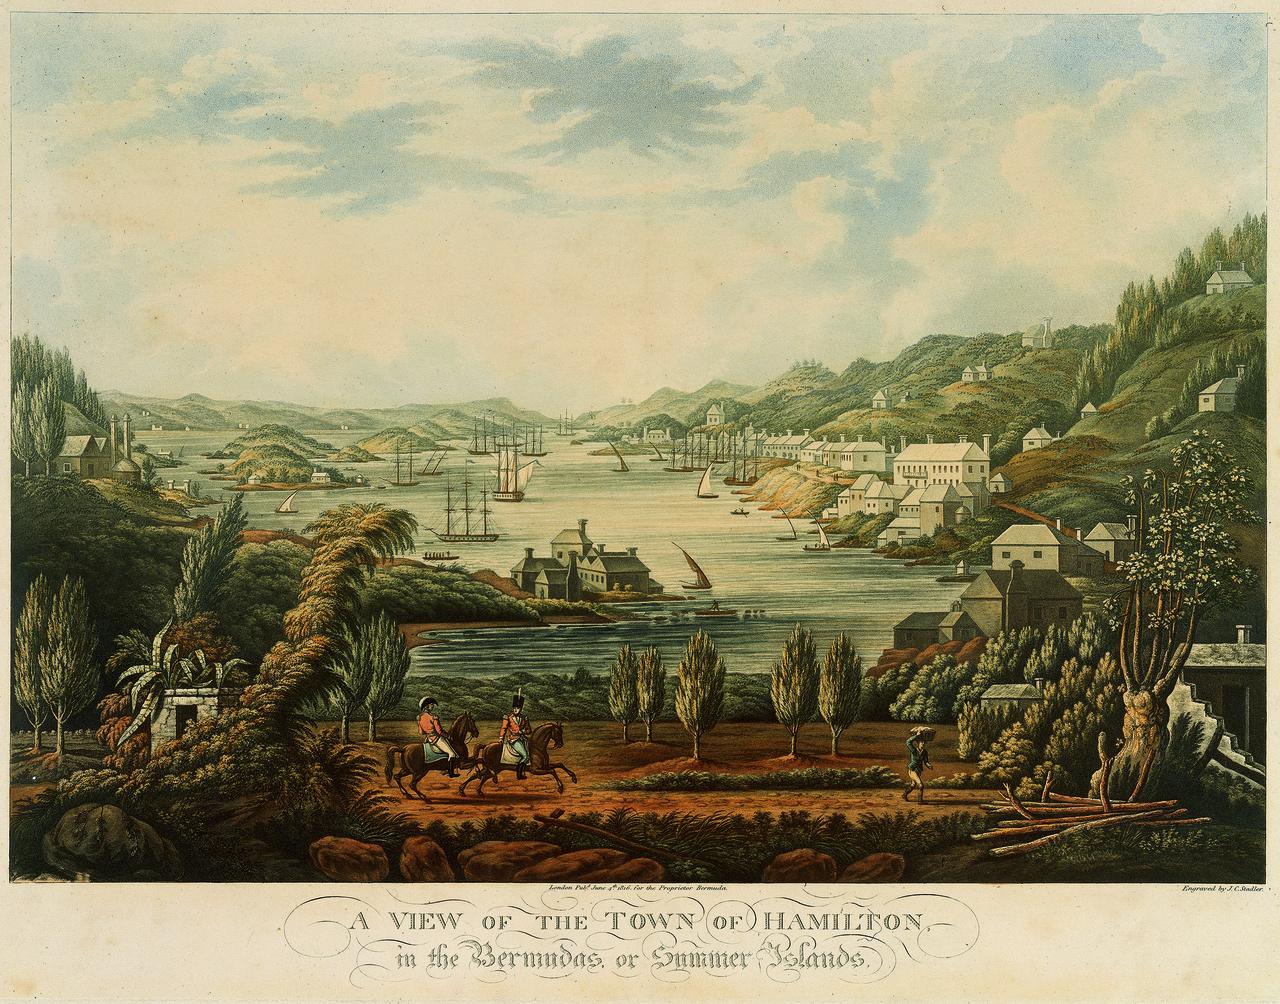 A View of the Town of Hamilton, in the Bermudas or Summer Islands